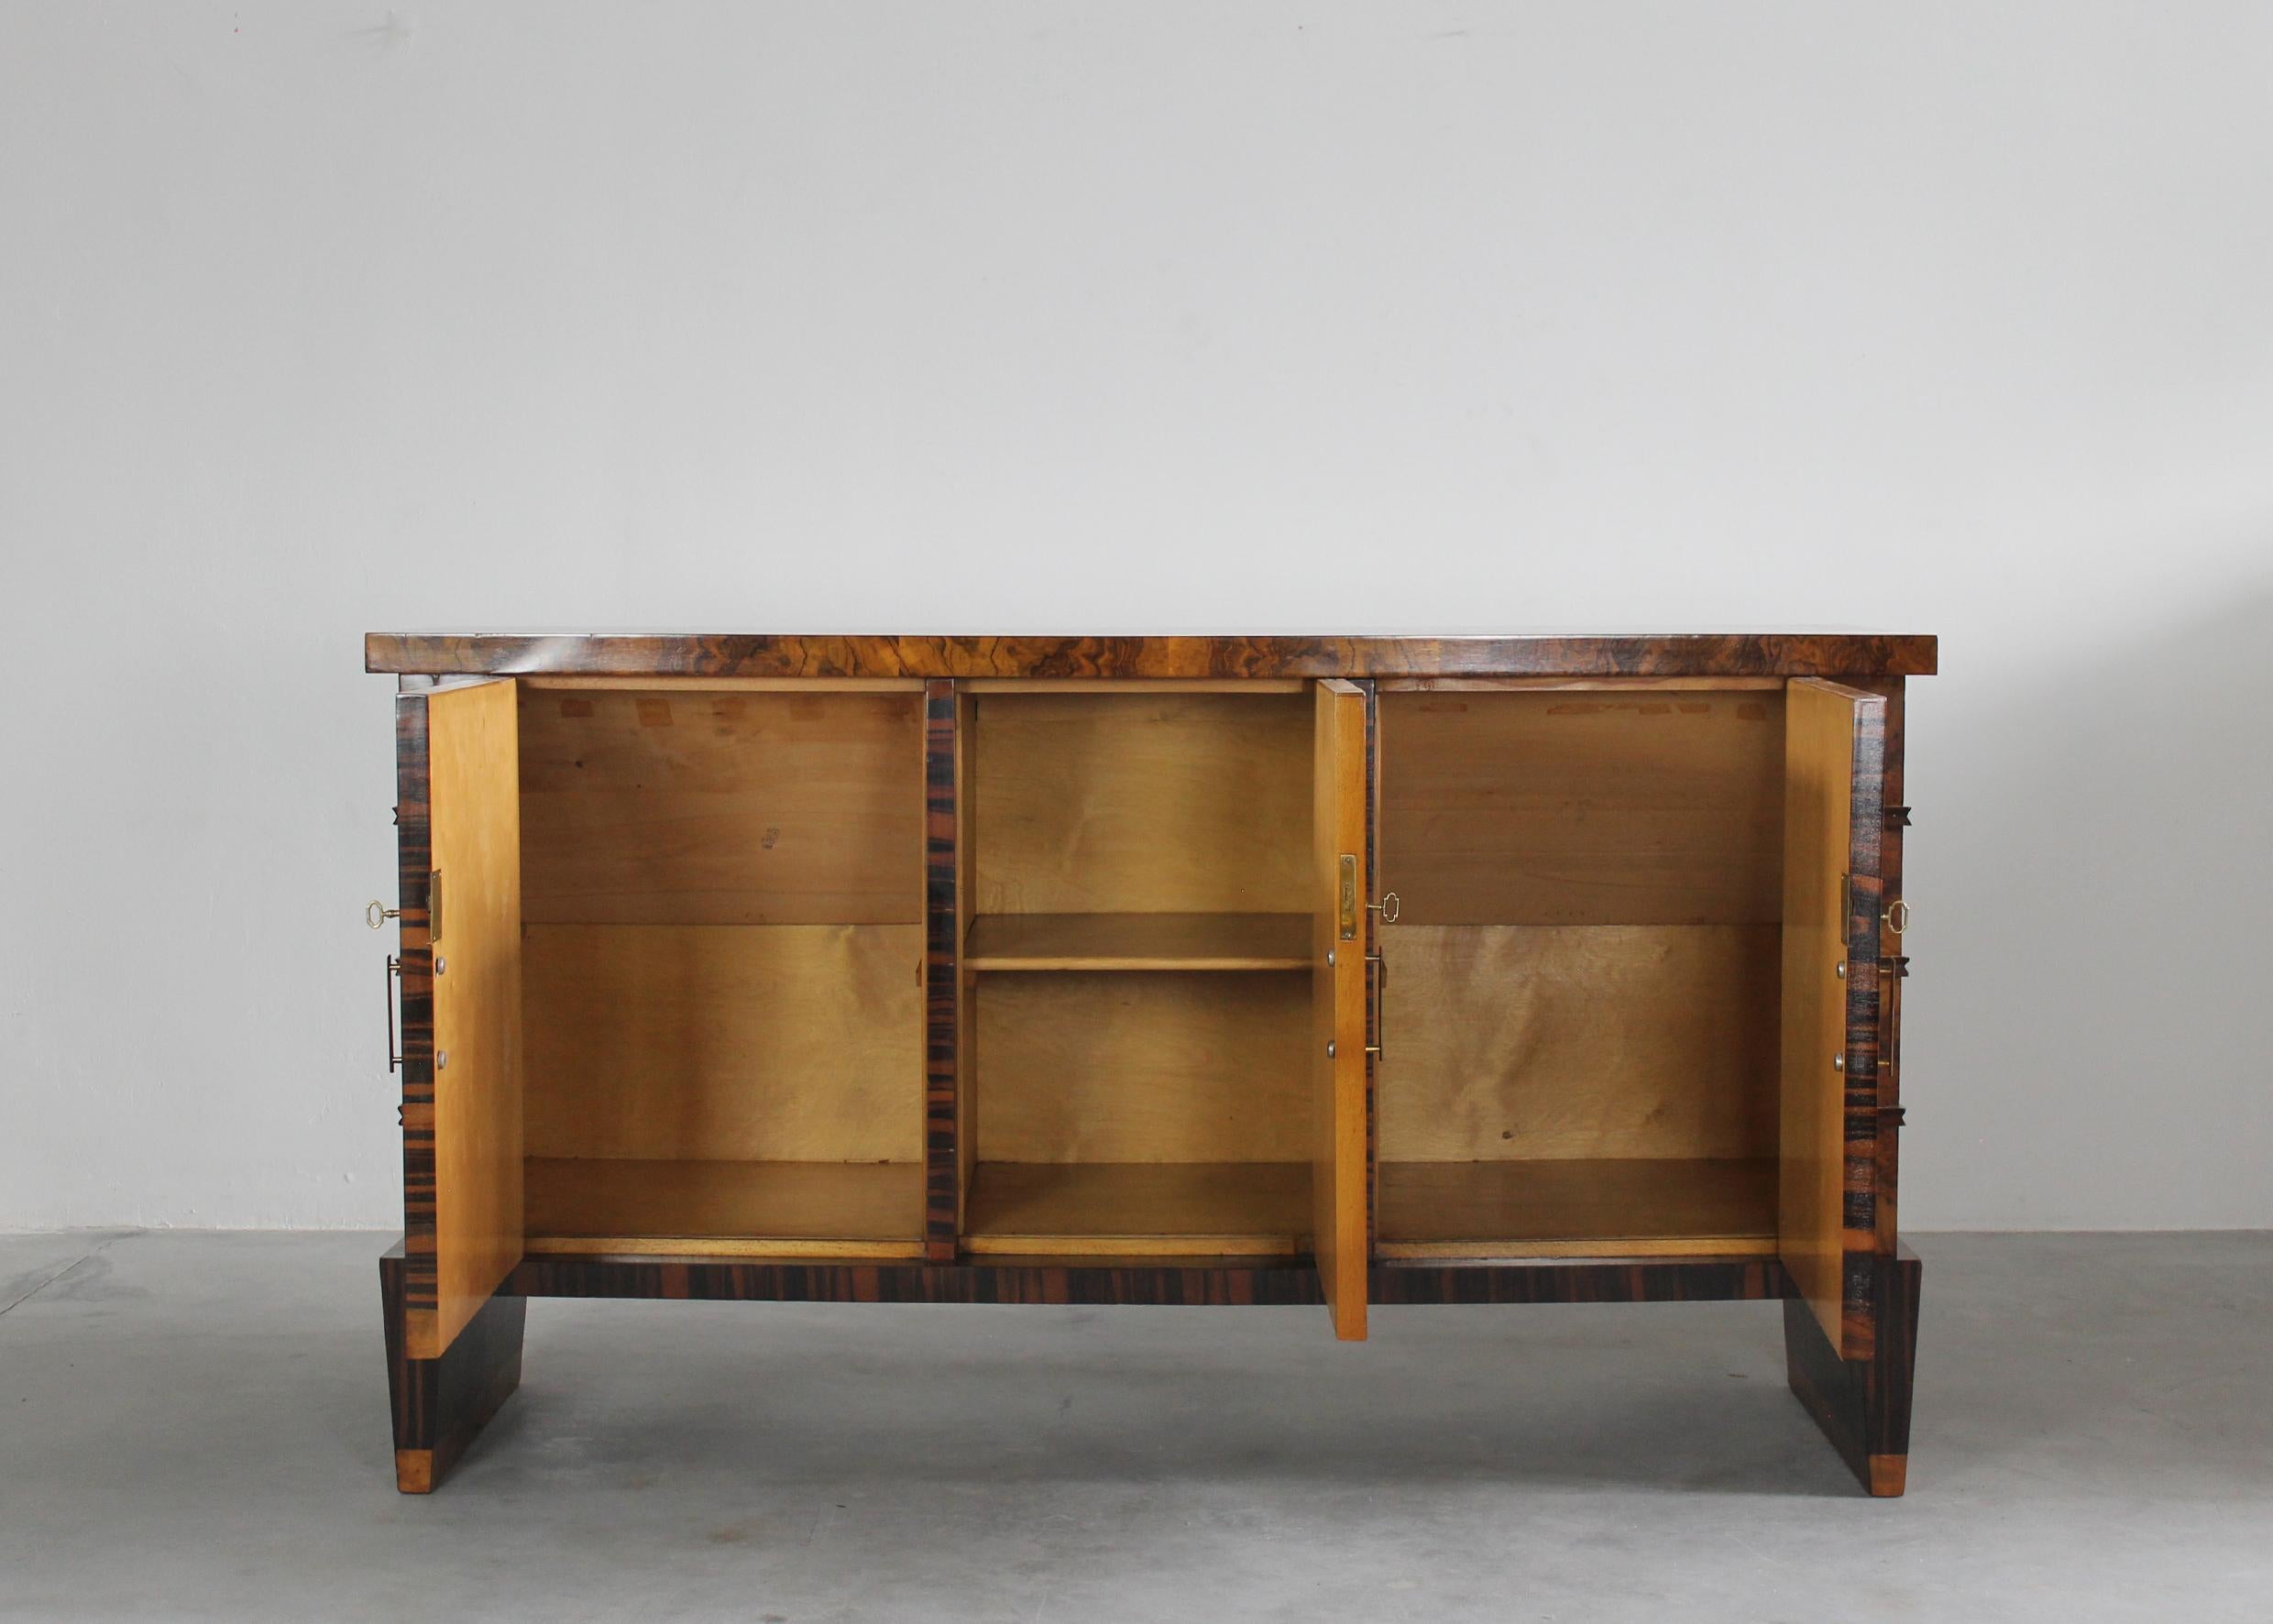 Emilio Lancia Large Sideboard in Walnut Wood Italian Manufacture 1930s In Good Condition For Sale In Montecatini Terme, IT